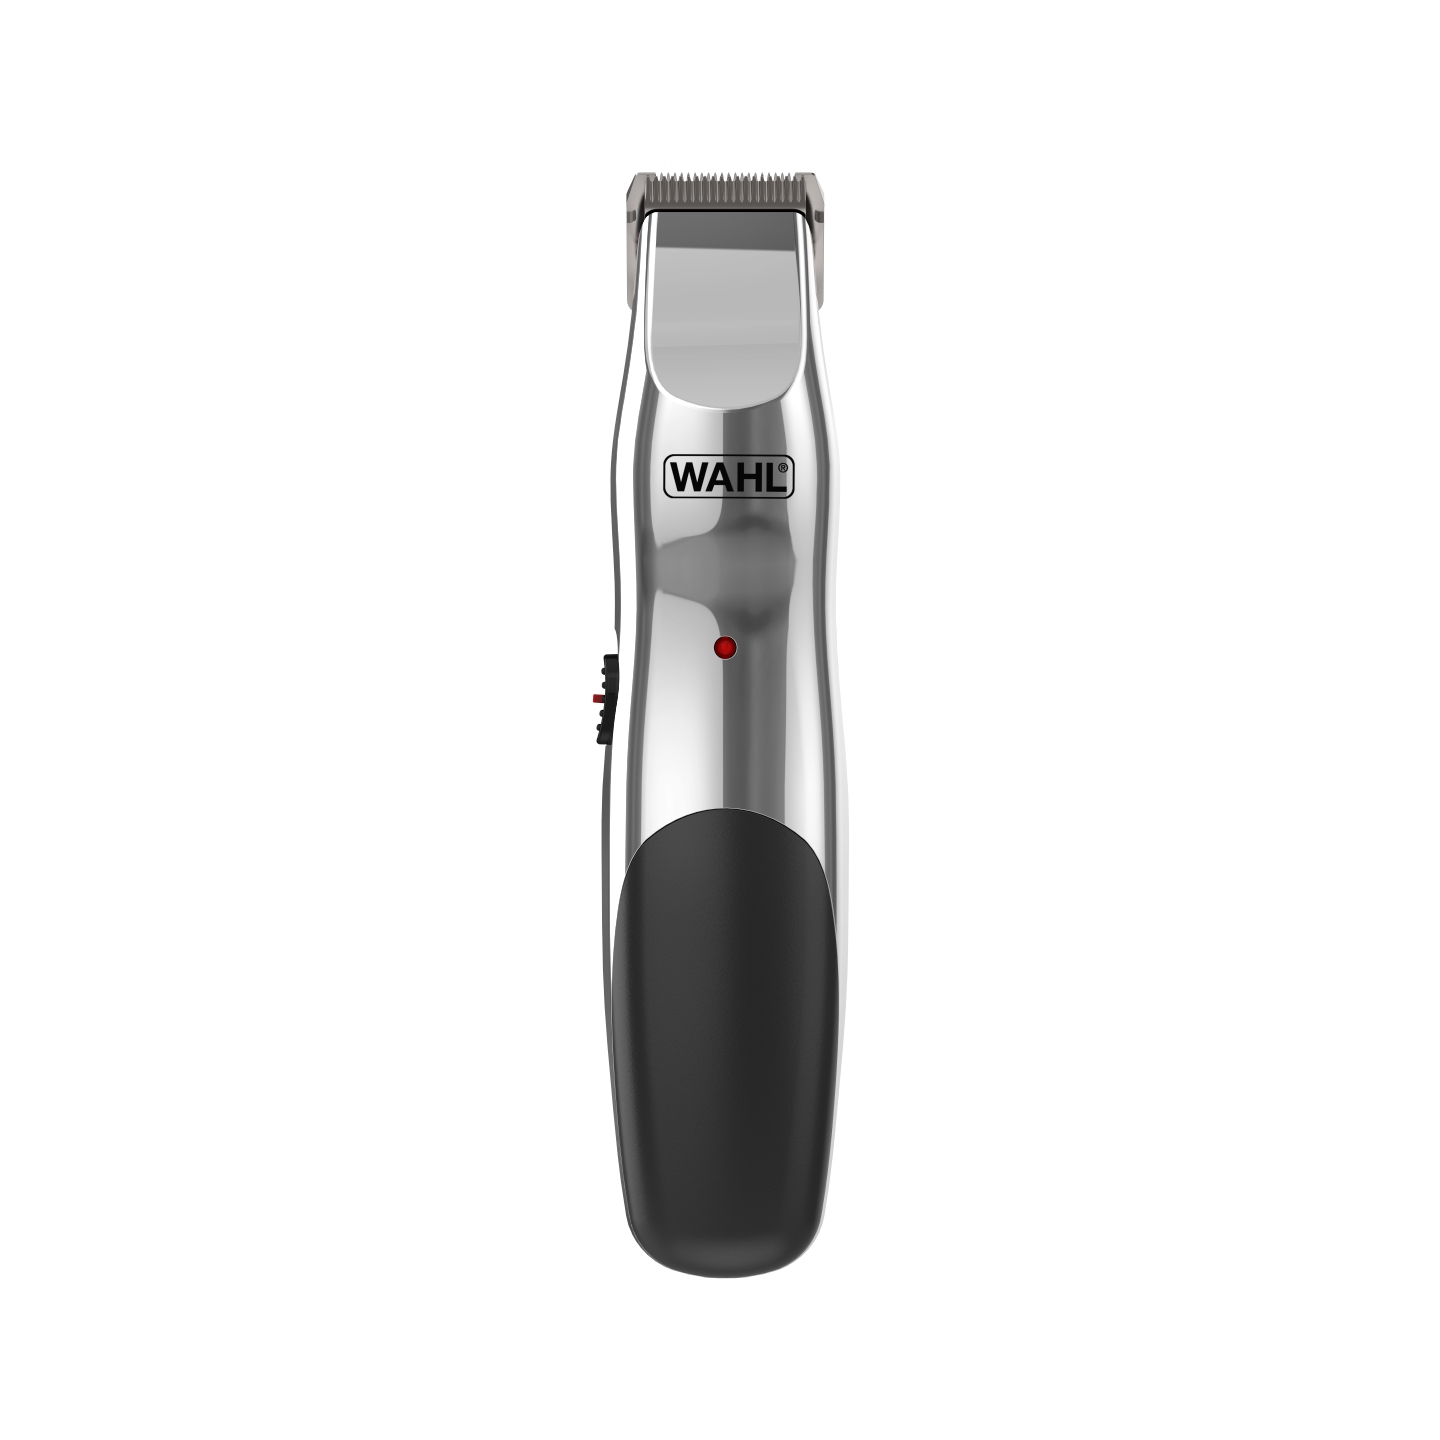 essentials clipper & trimmer kit by wahl